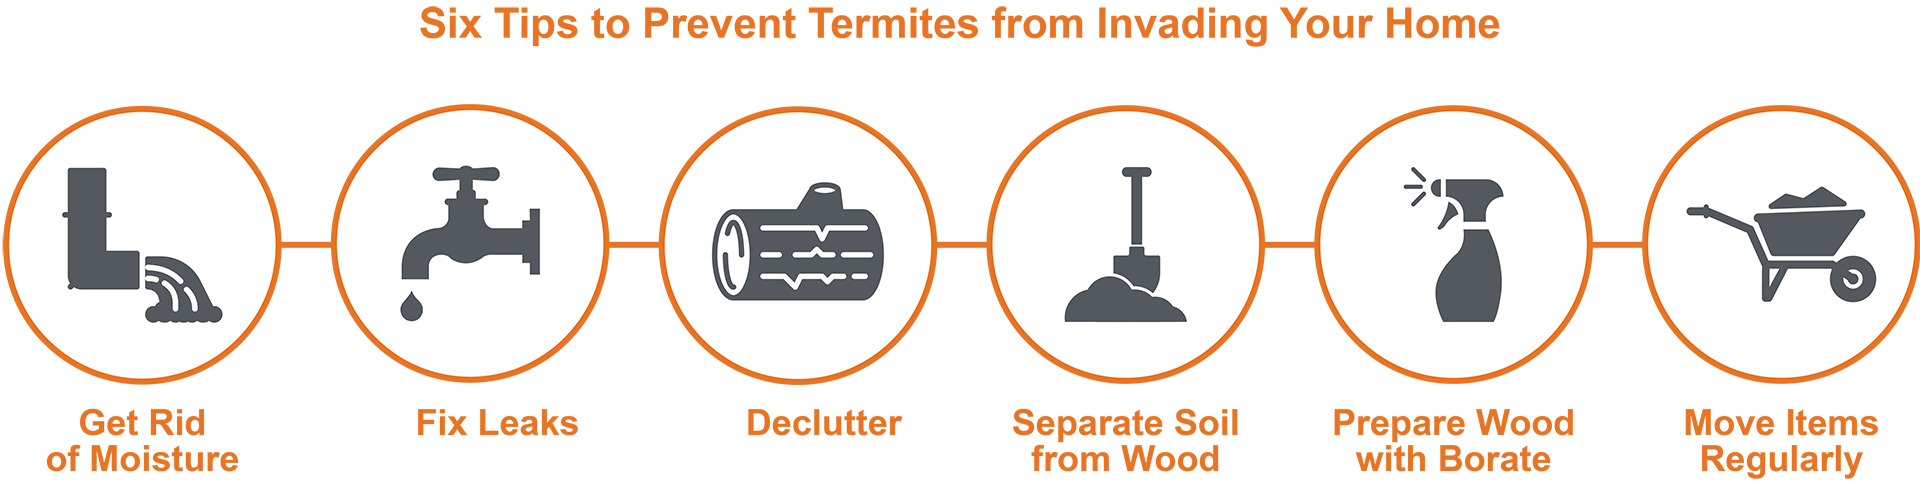 Six Tips To Prevent Termites From Invading Your Home